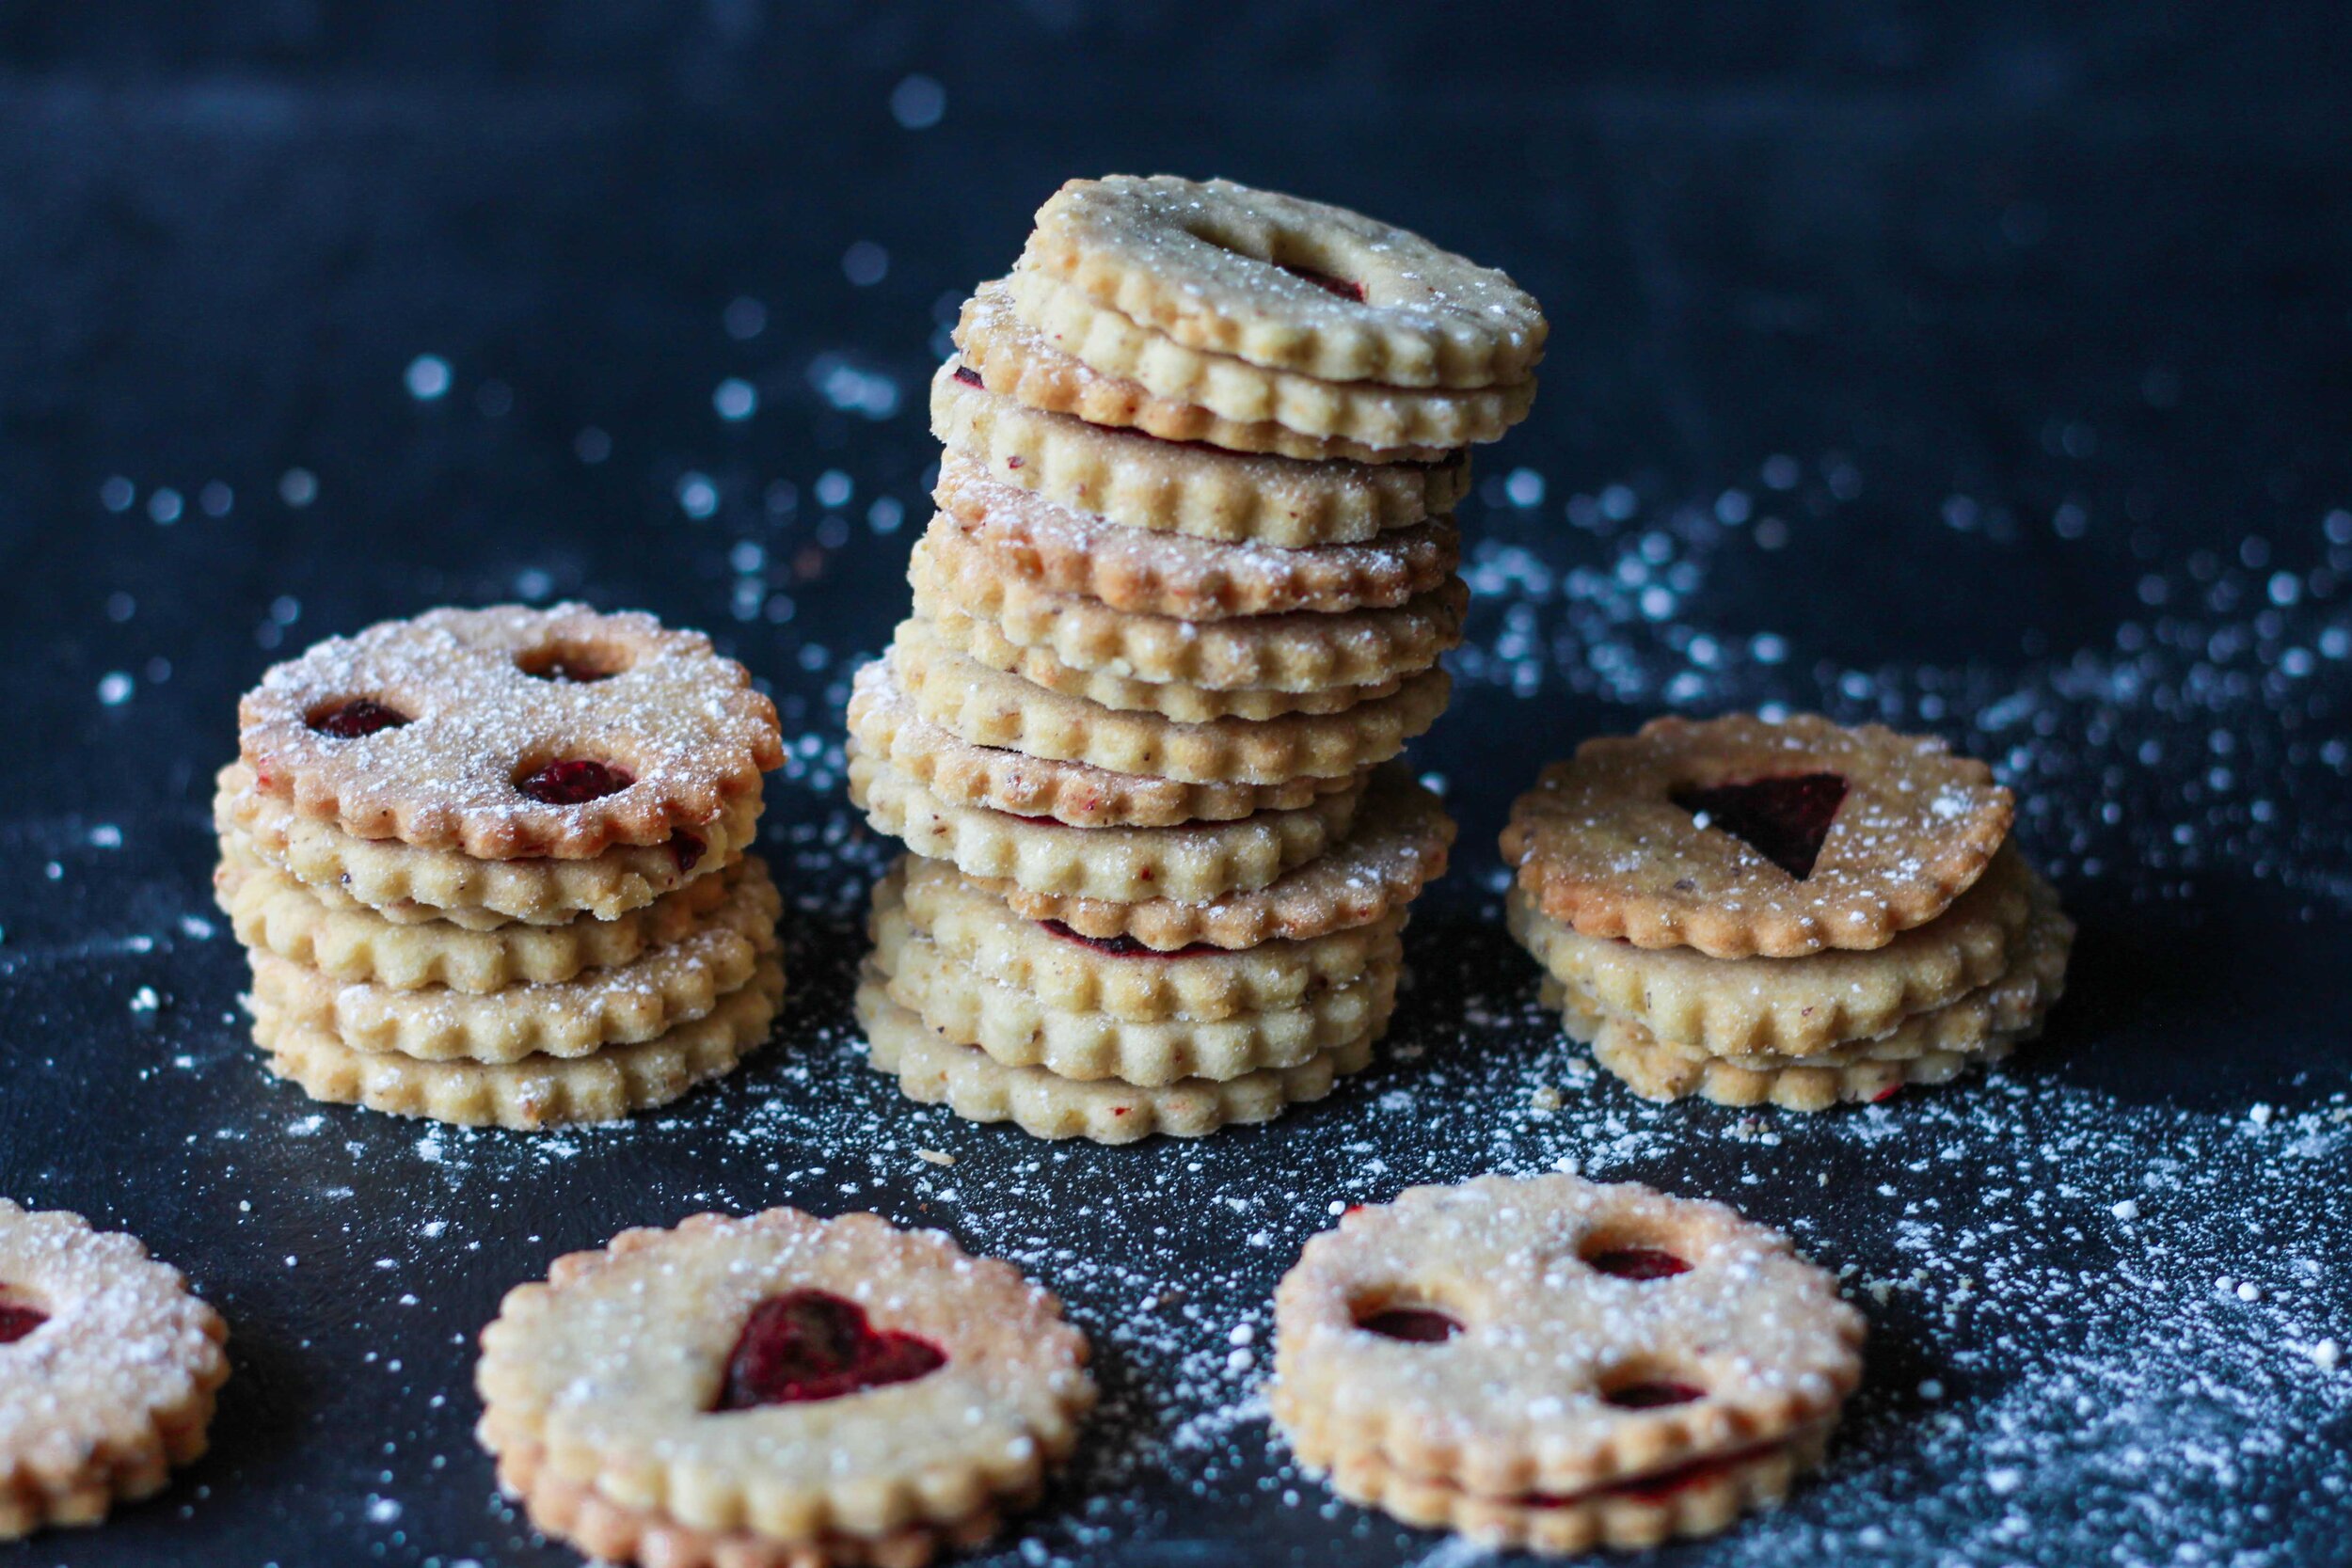 Linzer Augen Aka Spitzbuben Are Typical Austrian Christmas Cookies This Vegan Linzer Kekse Recipe Is Not Only Easy To Make But Also Super Delicious Fran S Future Kitchen